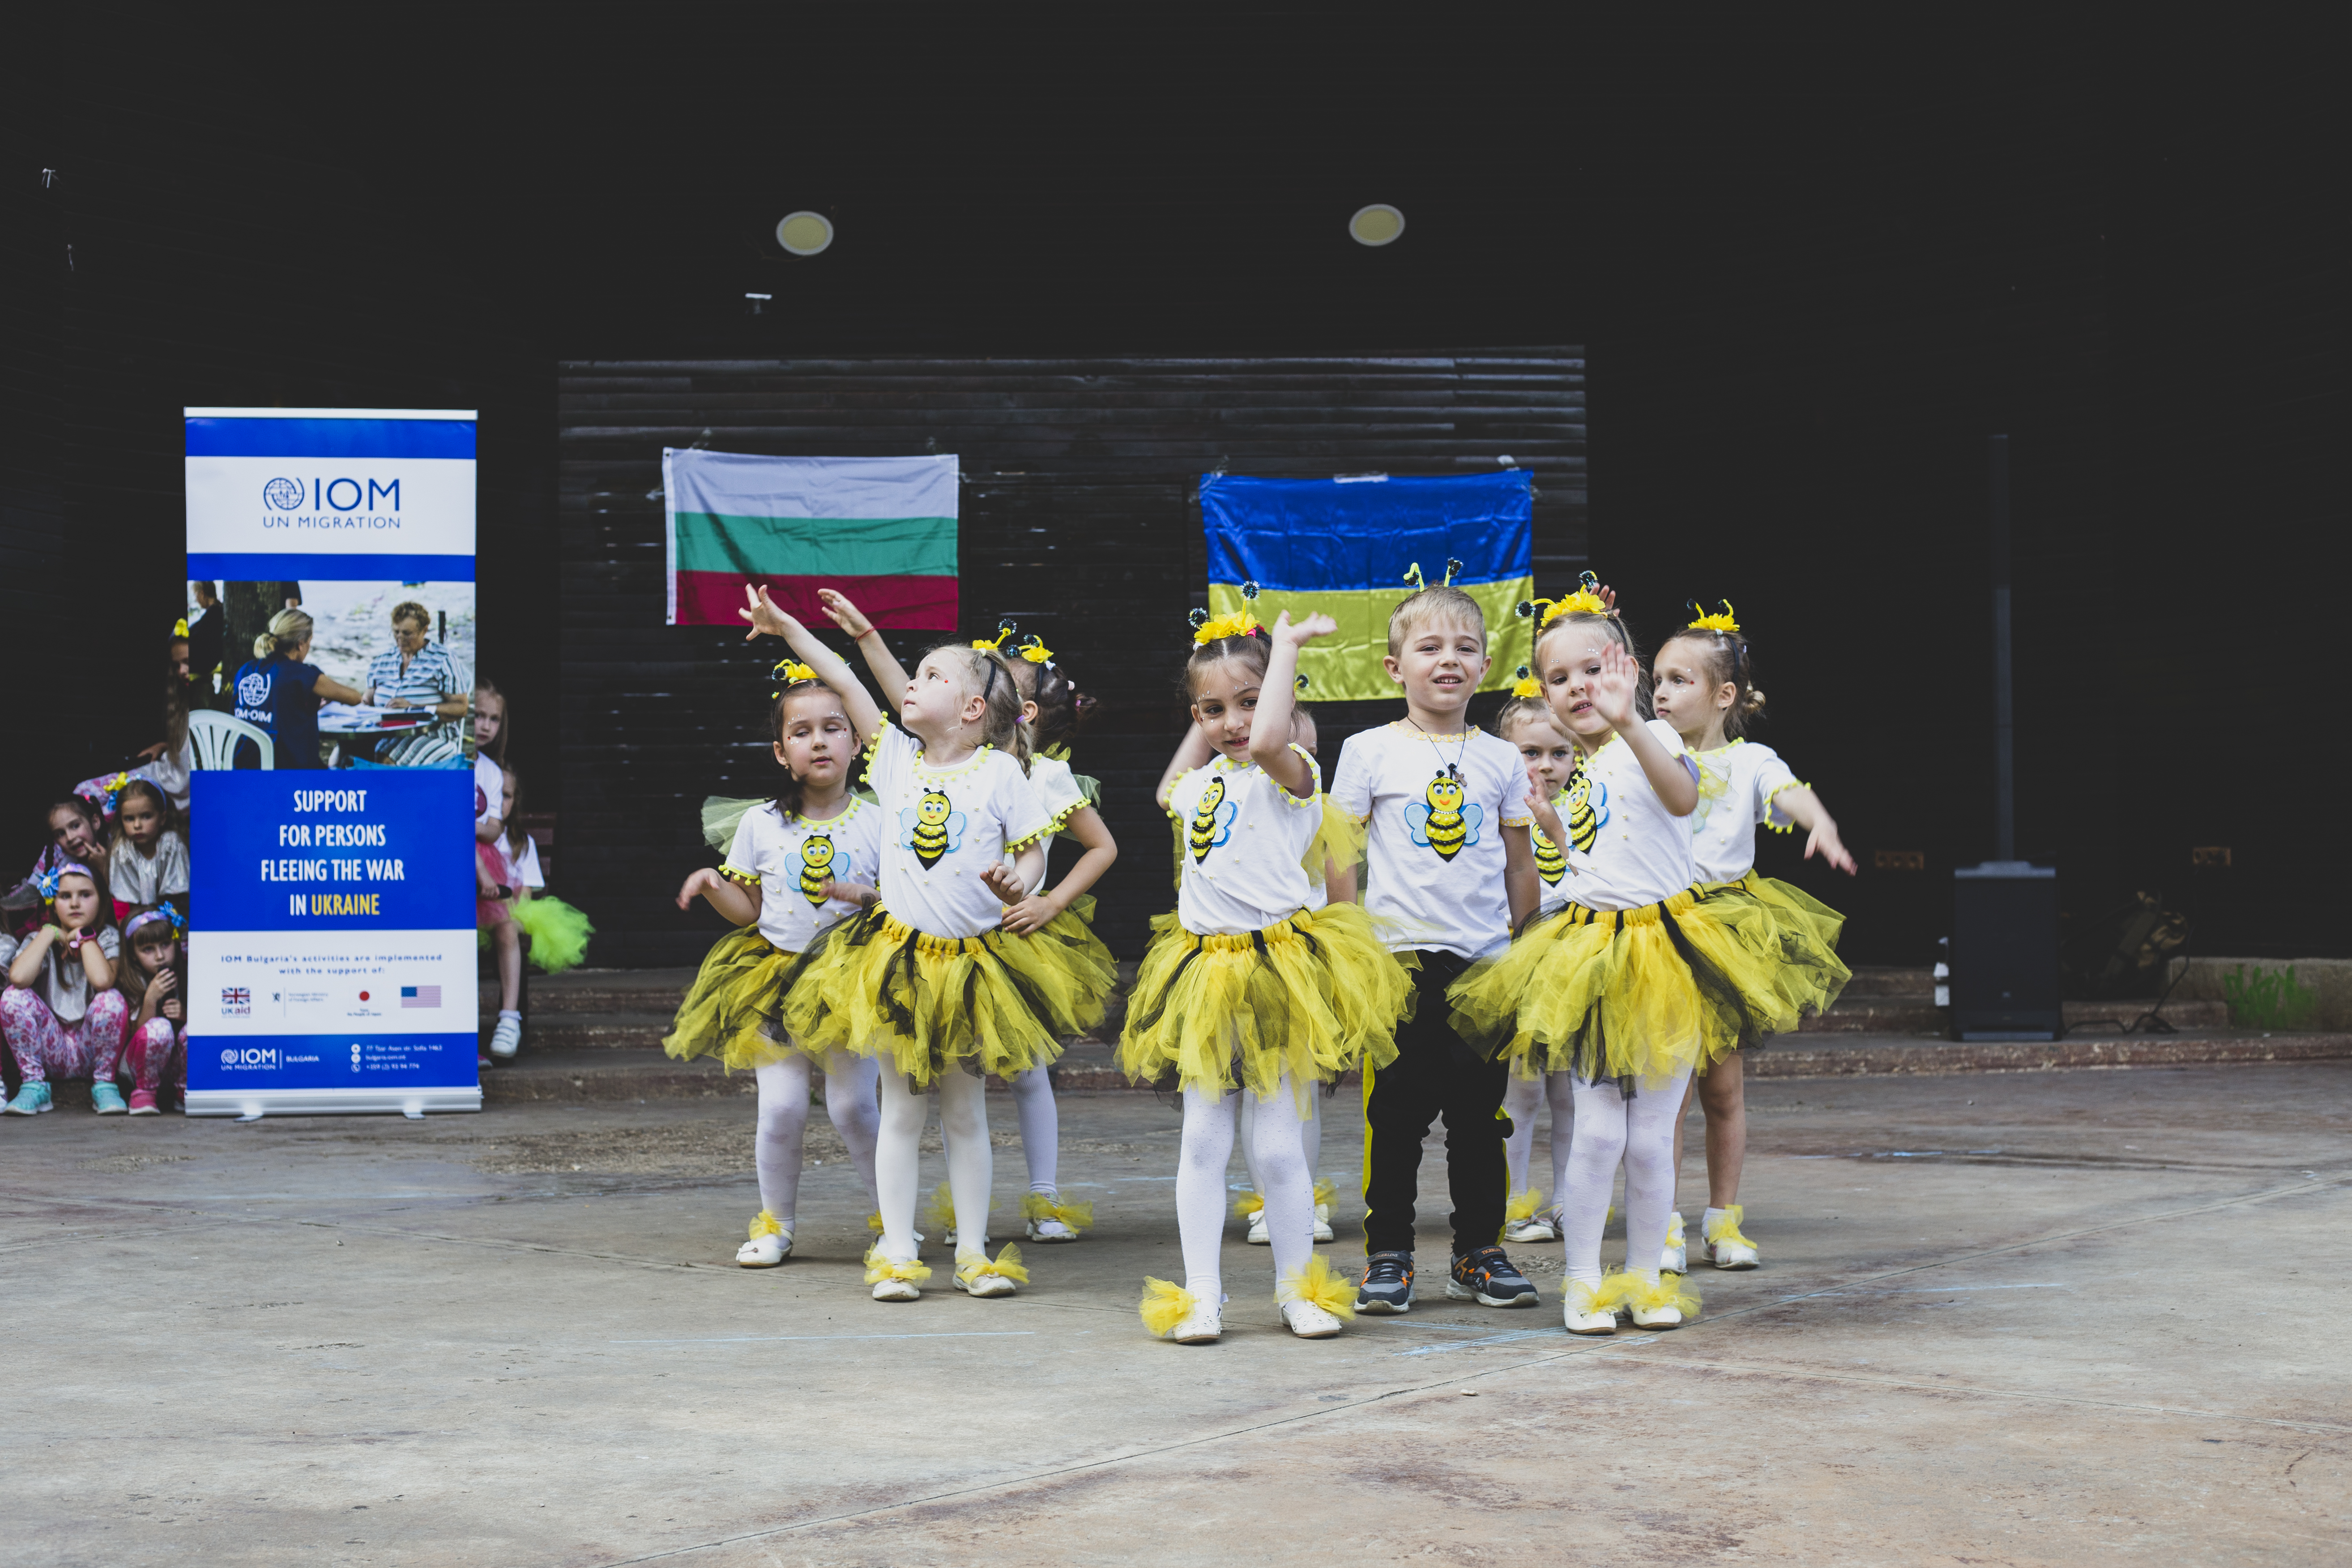 kids from Ukraine performing on stage